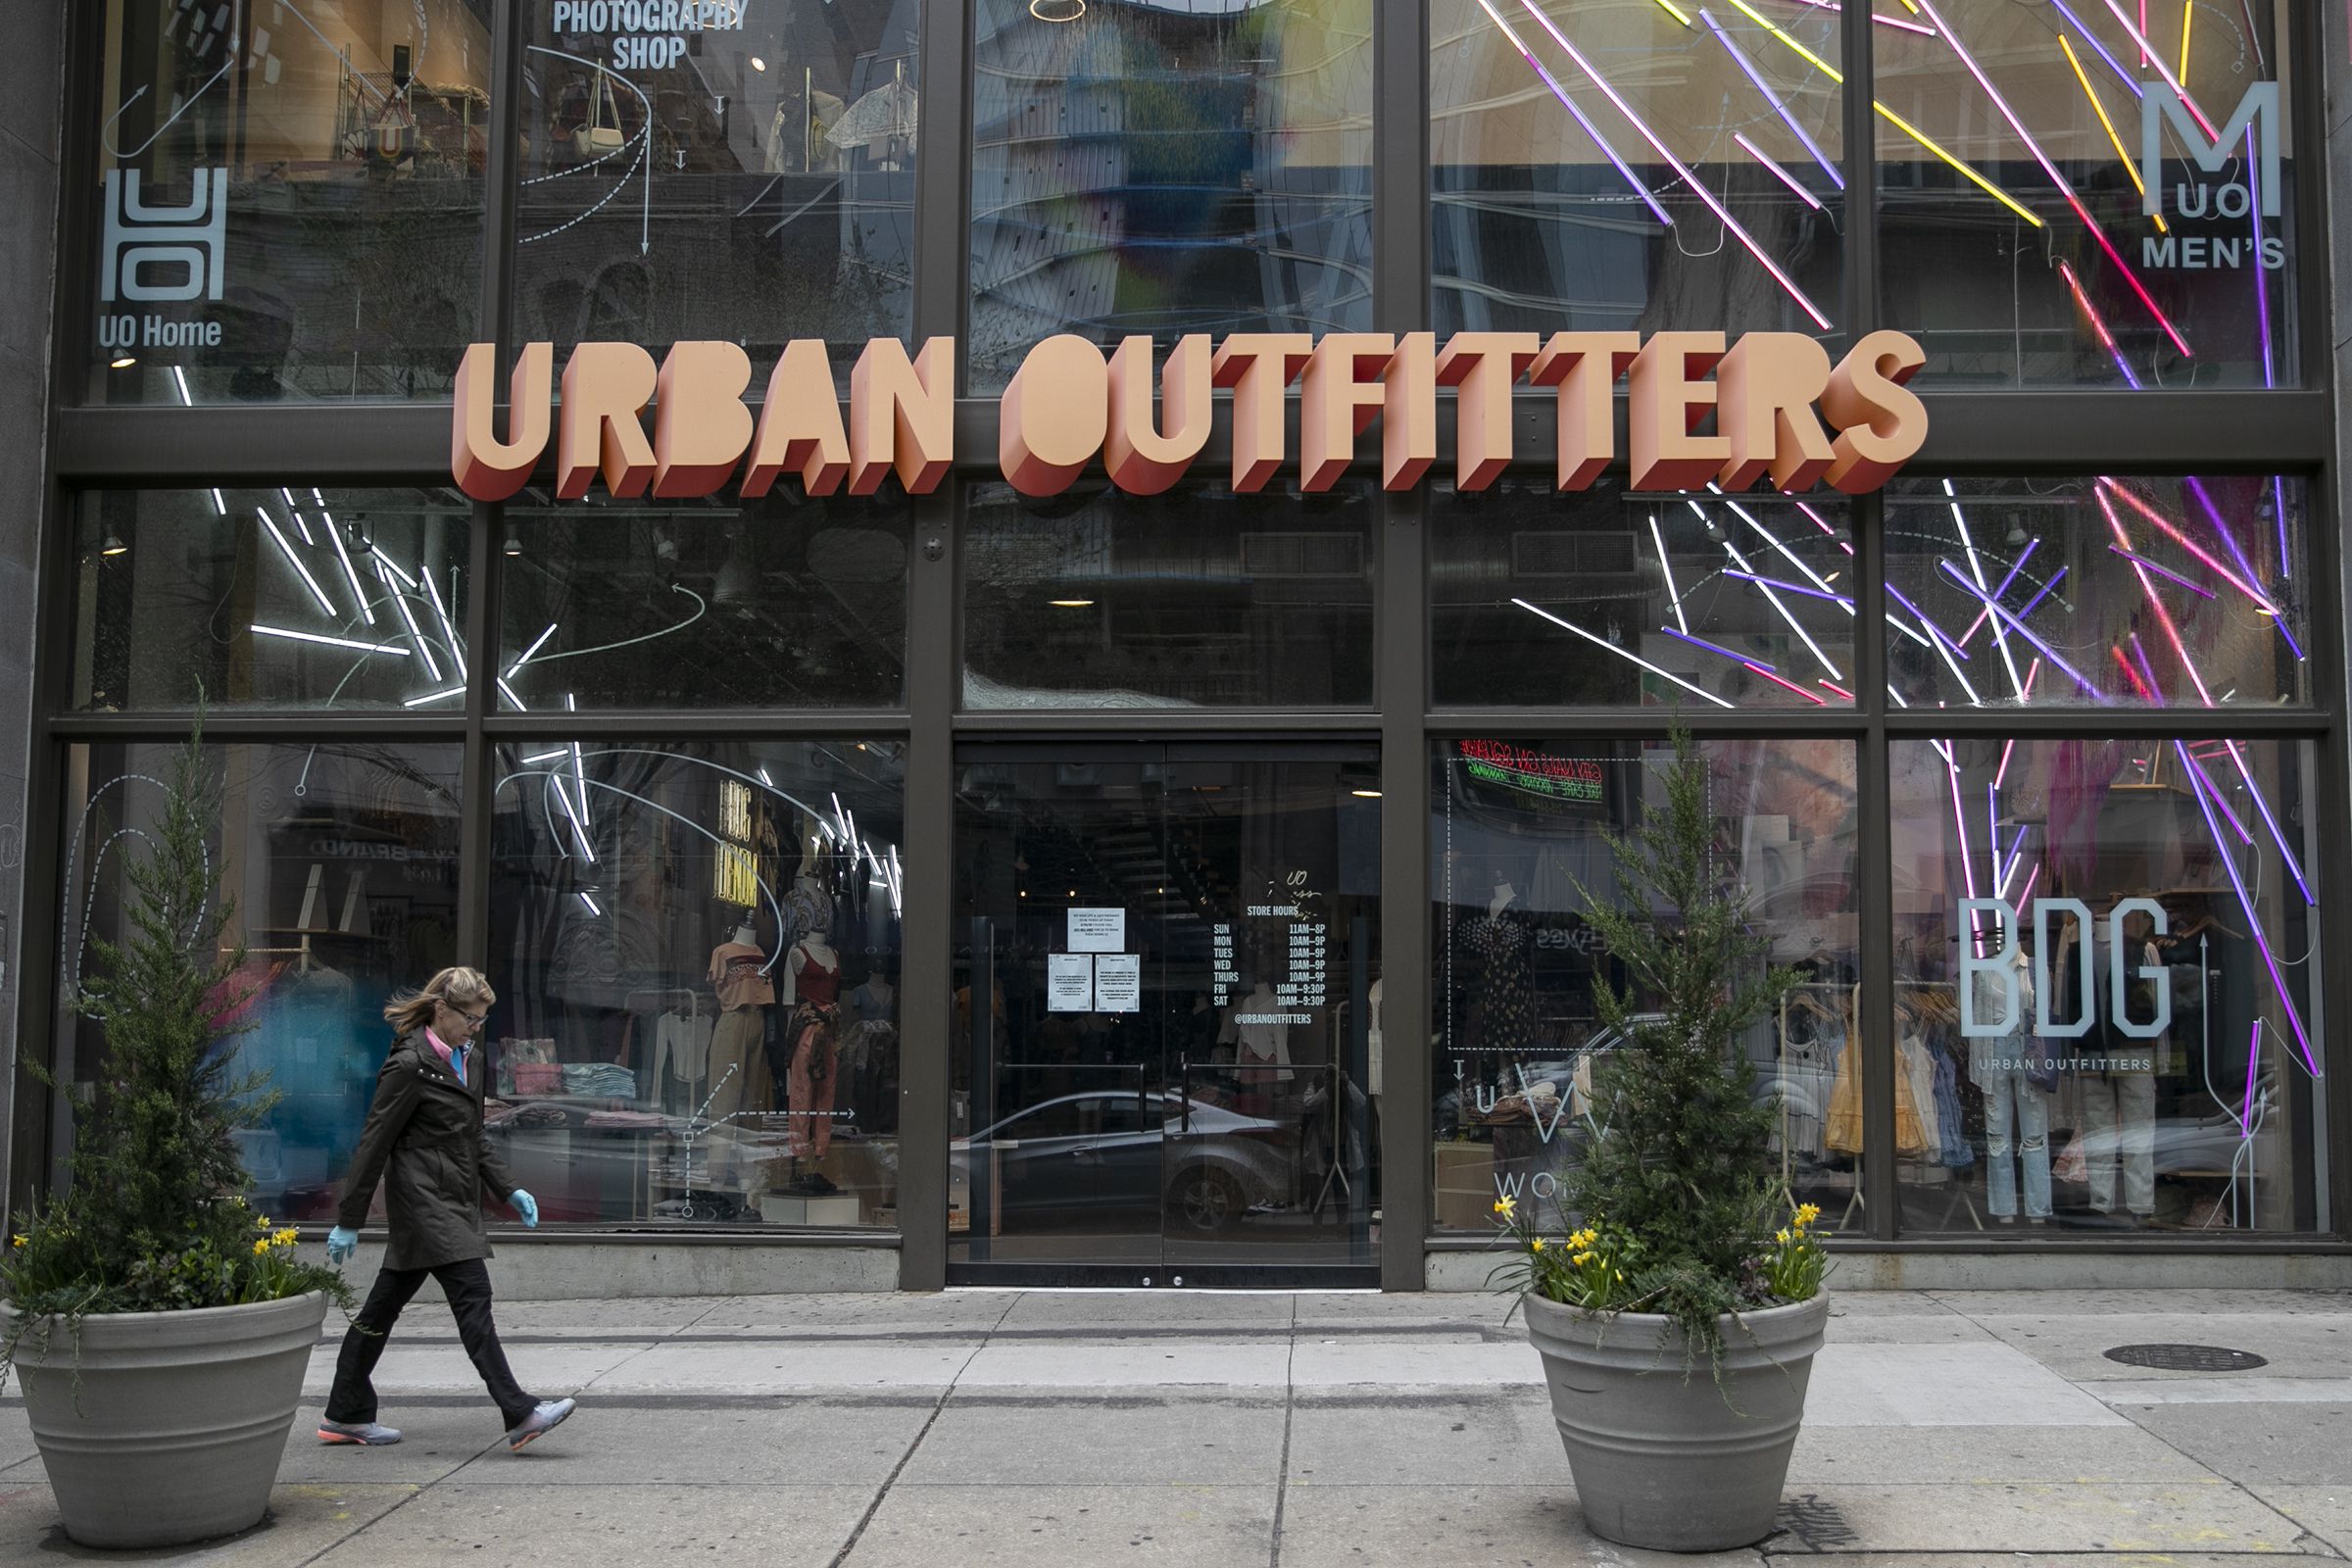 As Urban Outfitters sales struggle, the company is focusing on